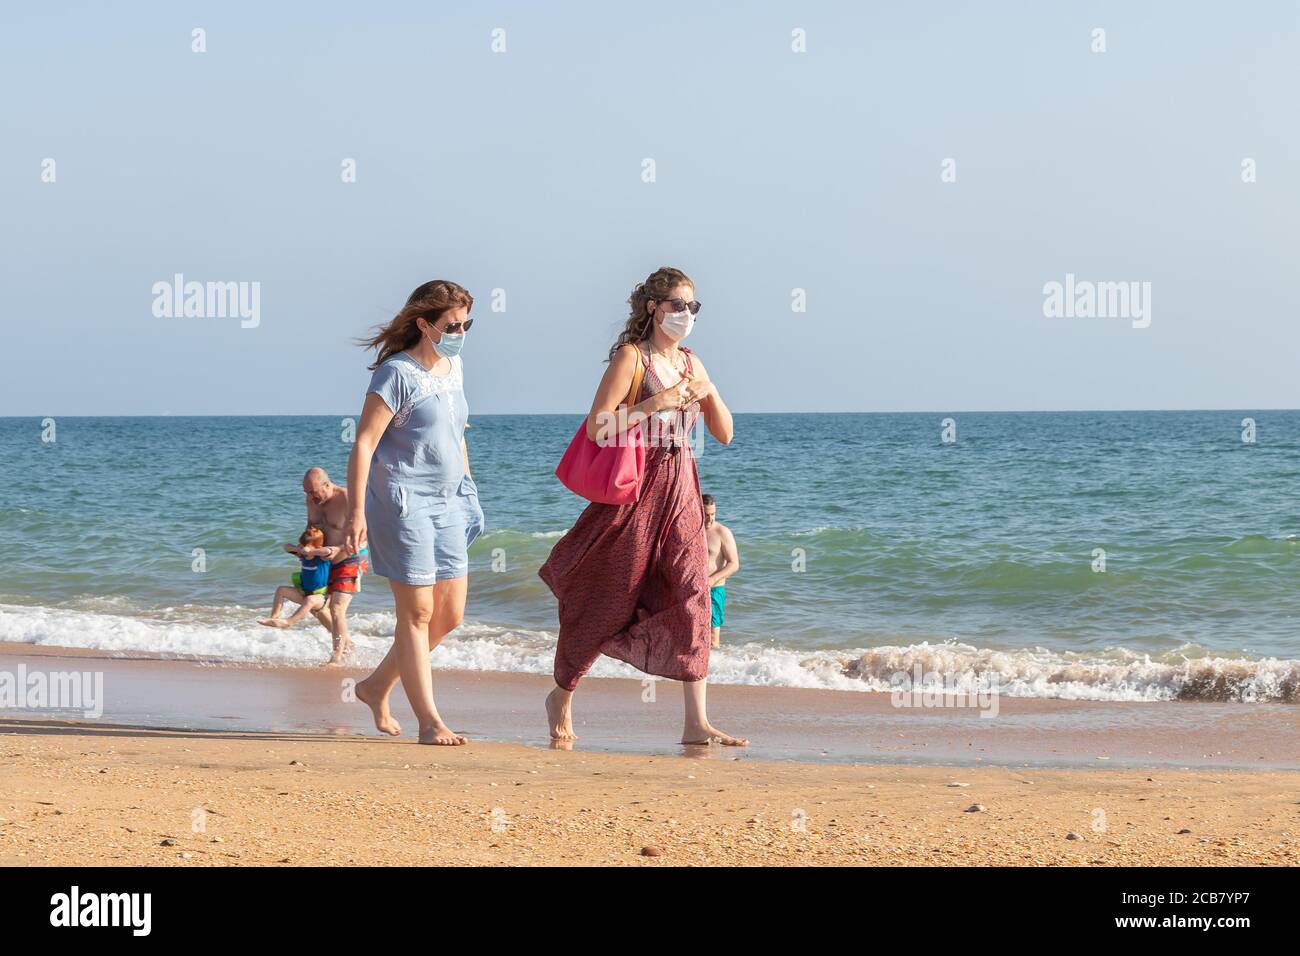 Punta Umbria, Huelva, Spain - August 7, 2020: Two woman walking by the beach wearing protective or medical face masks. New normal in Spain with social Stock Photo